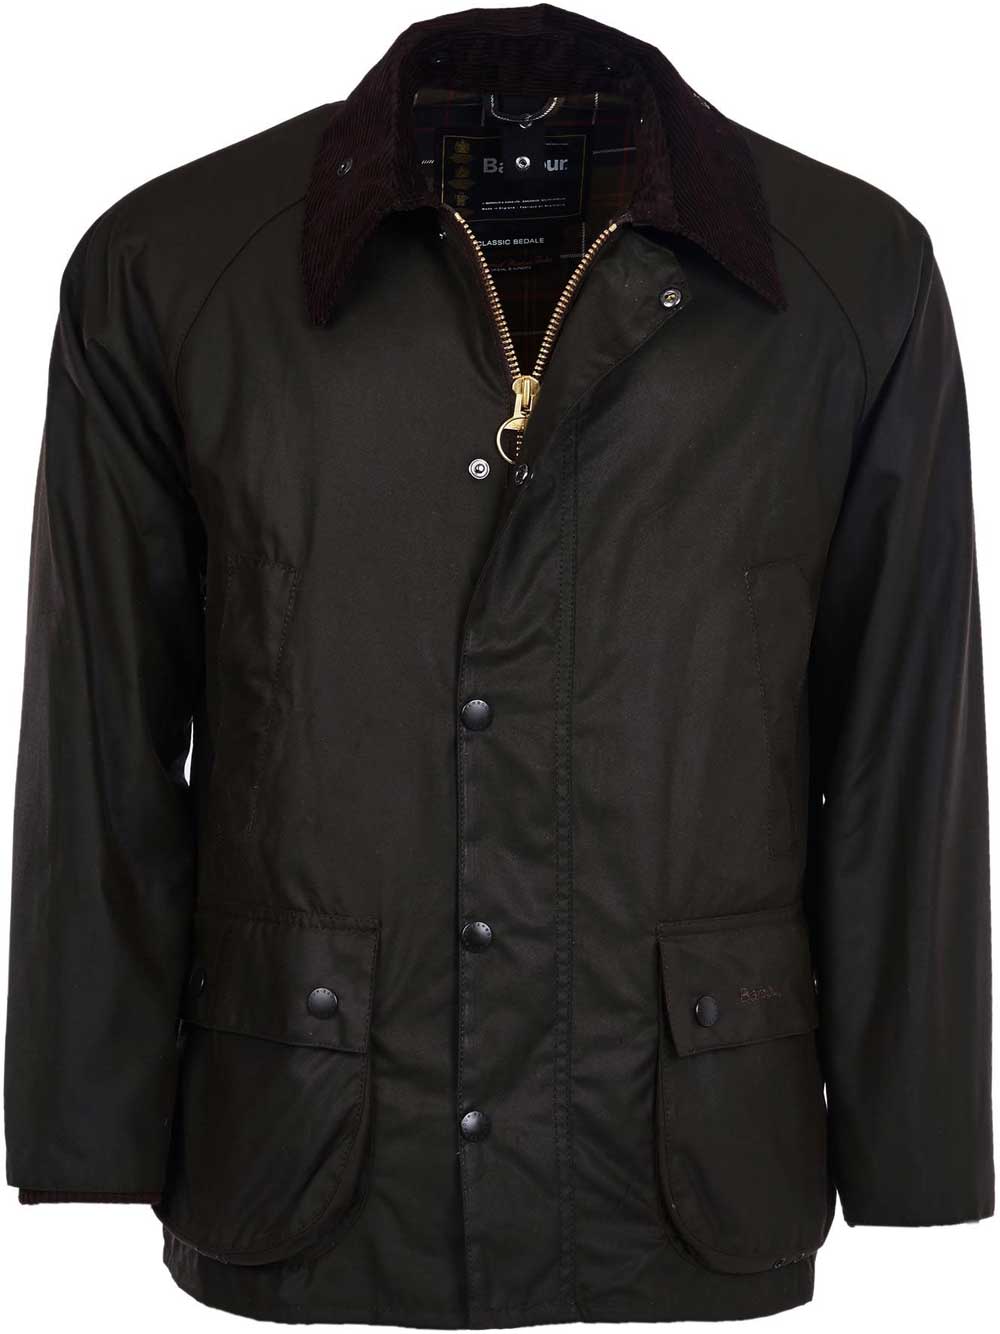 BARBOUR Wax Jacket - Mens Classic Bedale - Olive